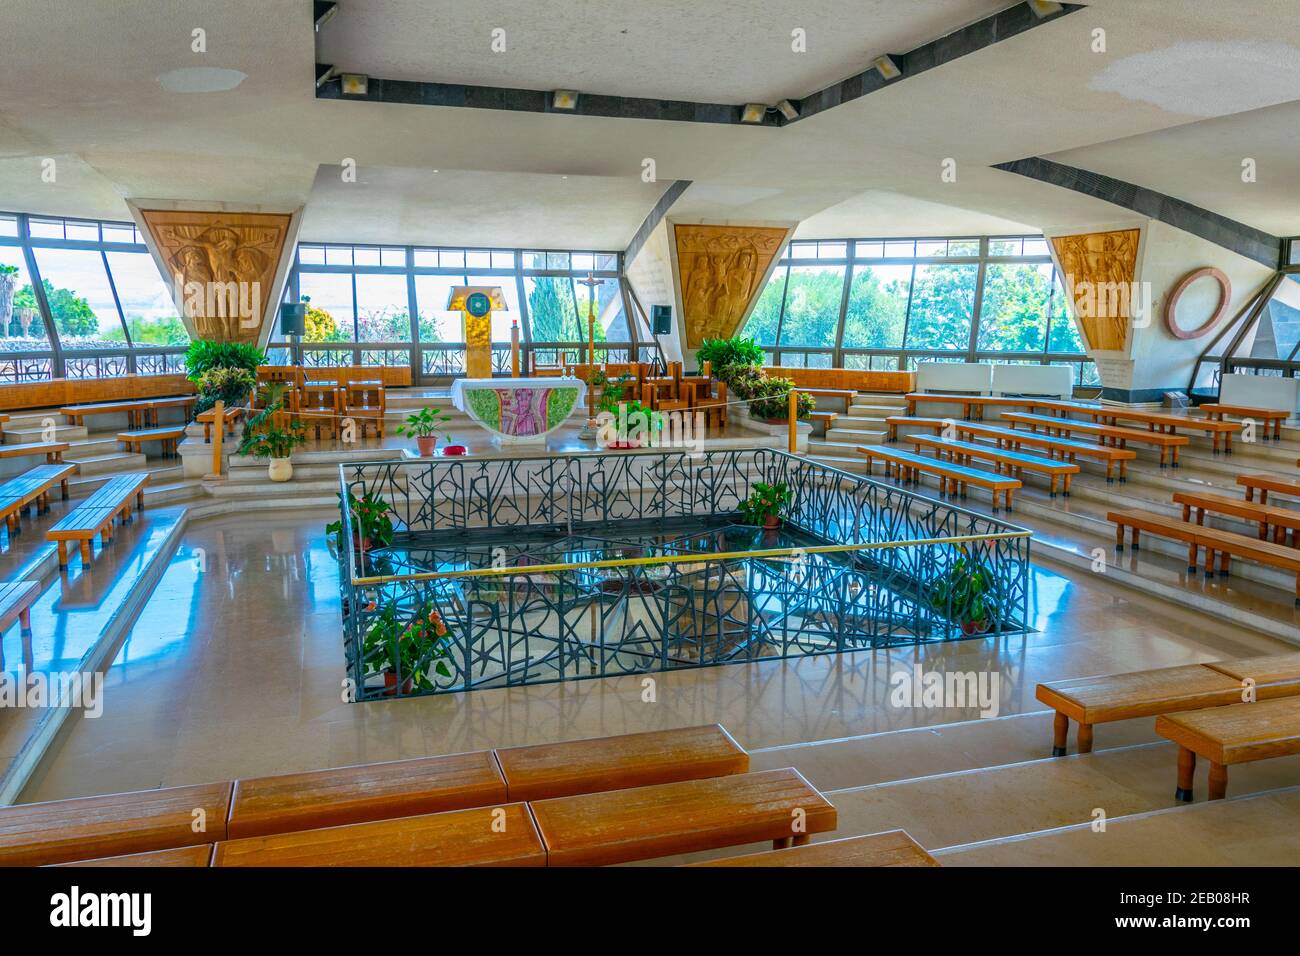 CAPERNAUM, ISRAEL, SEPTEMBER 15, 2018: Interior of a modern church inside of the Capernaum complex in Israel Stock Photo